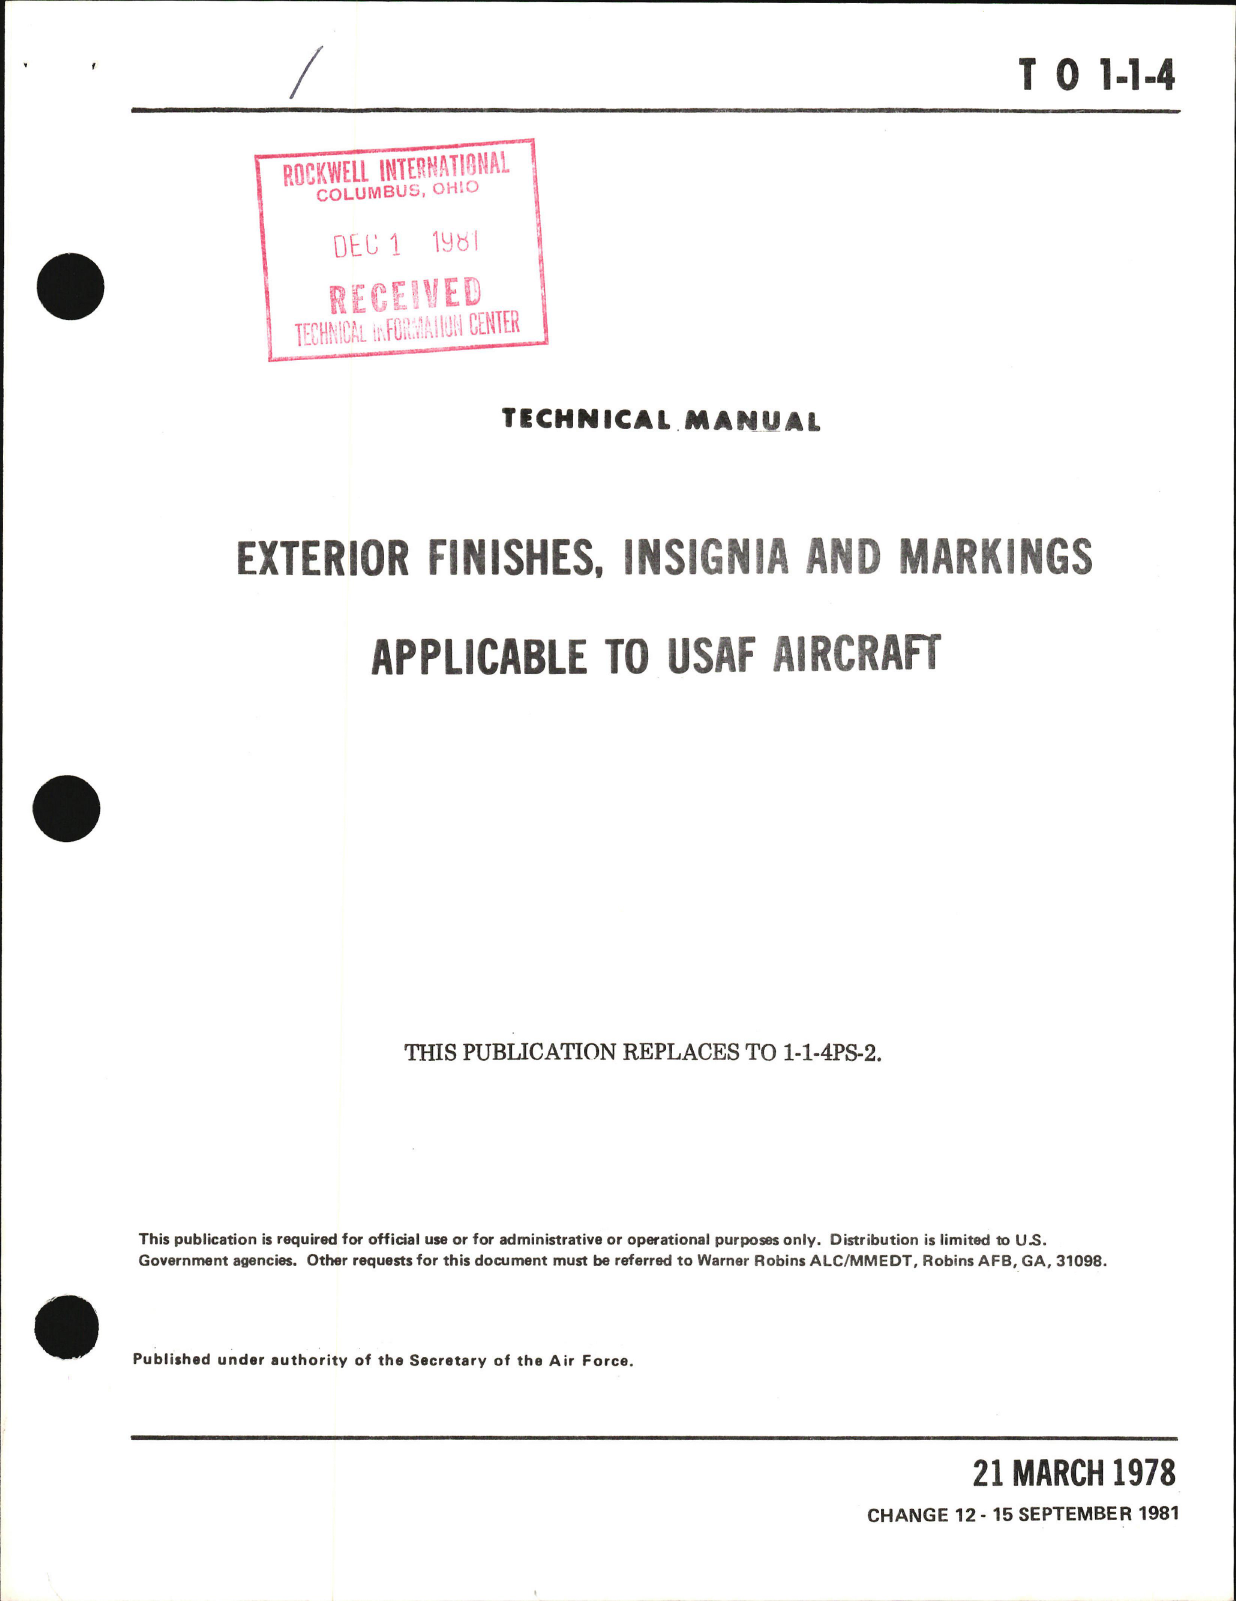 Sample page 1 from AirCorps Library document: Exterior Finishes, Insignia and Markings for USAF Aircraft - Change - 12